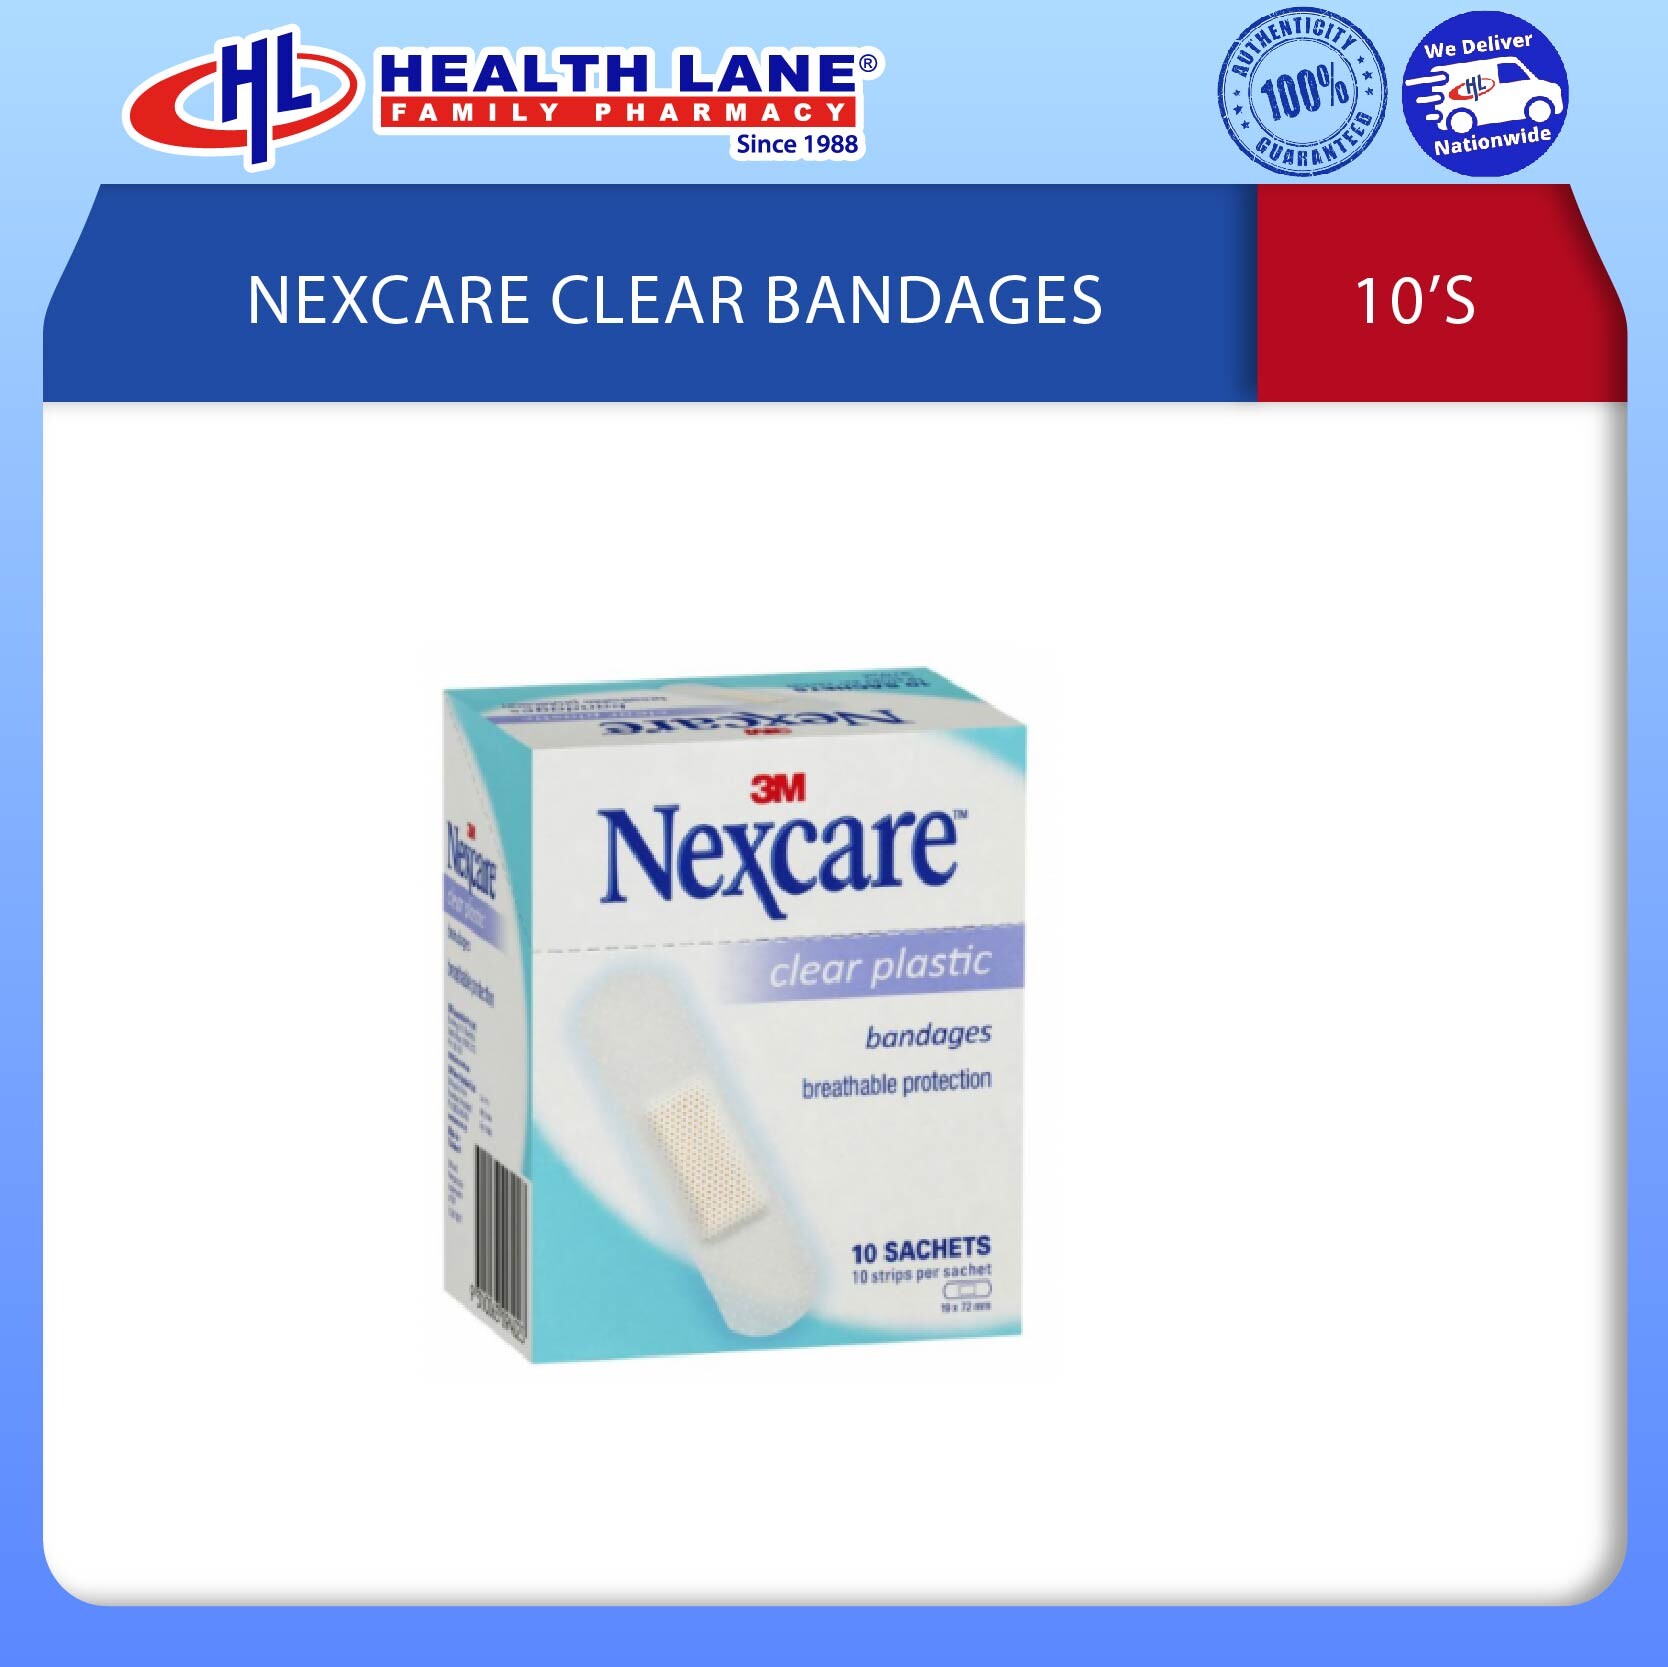 NEXCARE CLEAR BANDAGES 10'S